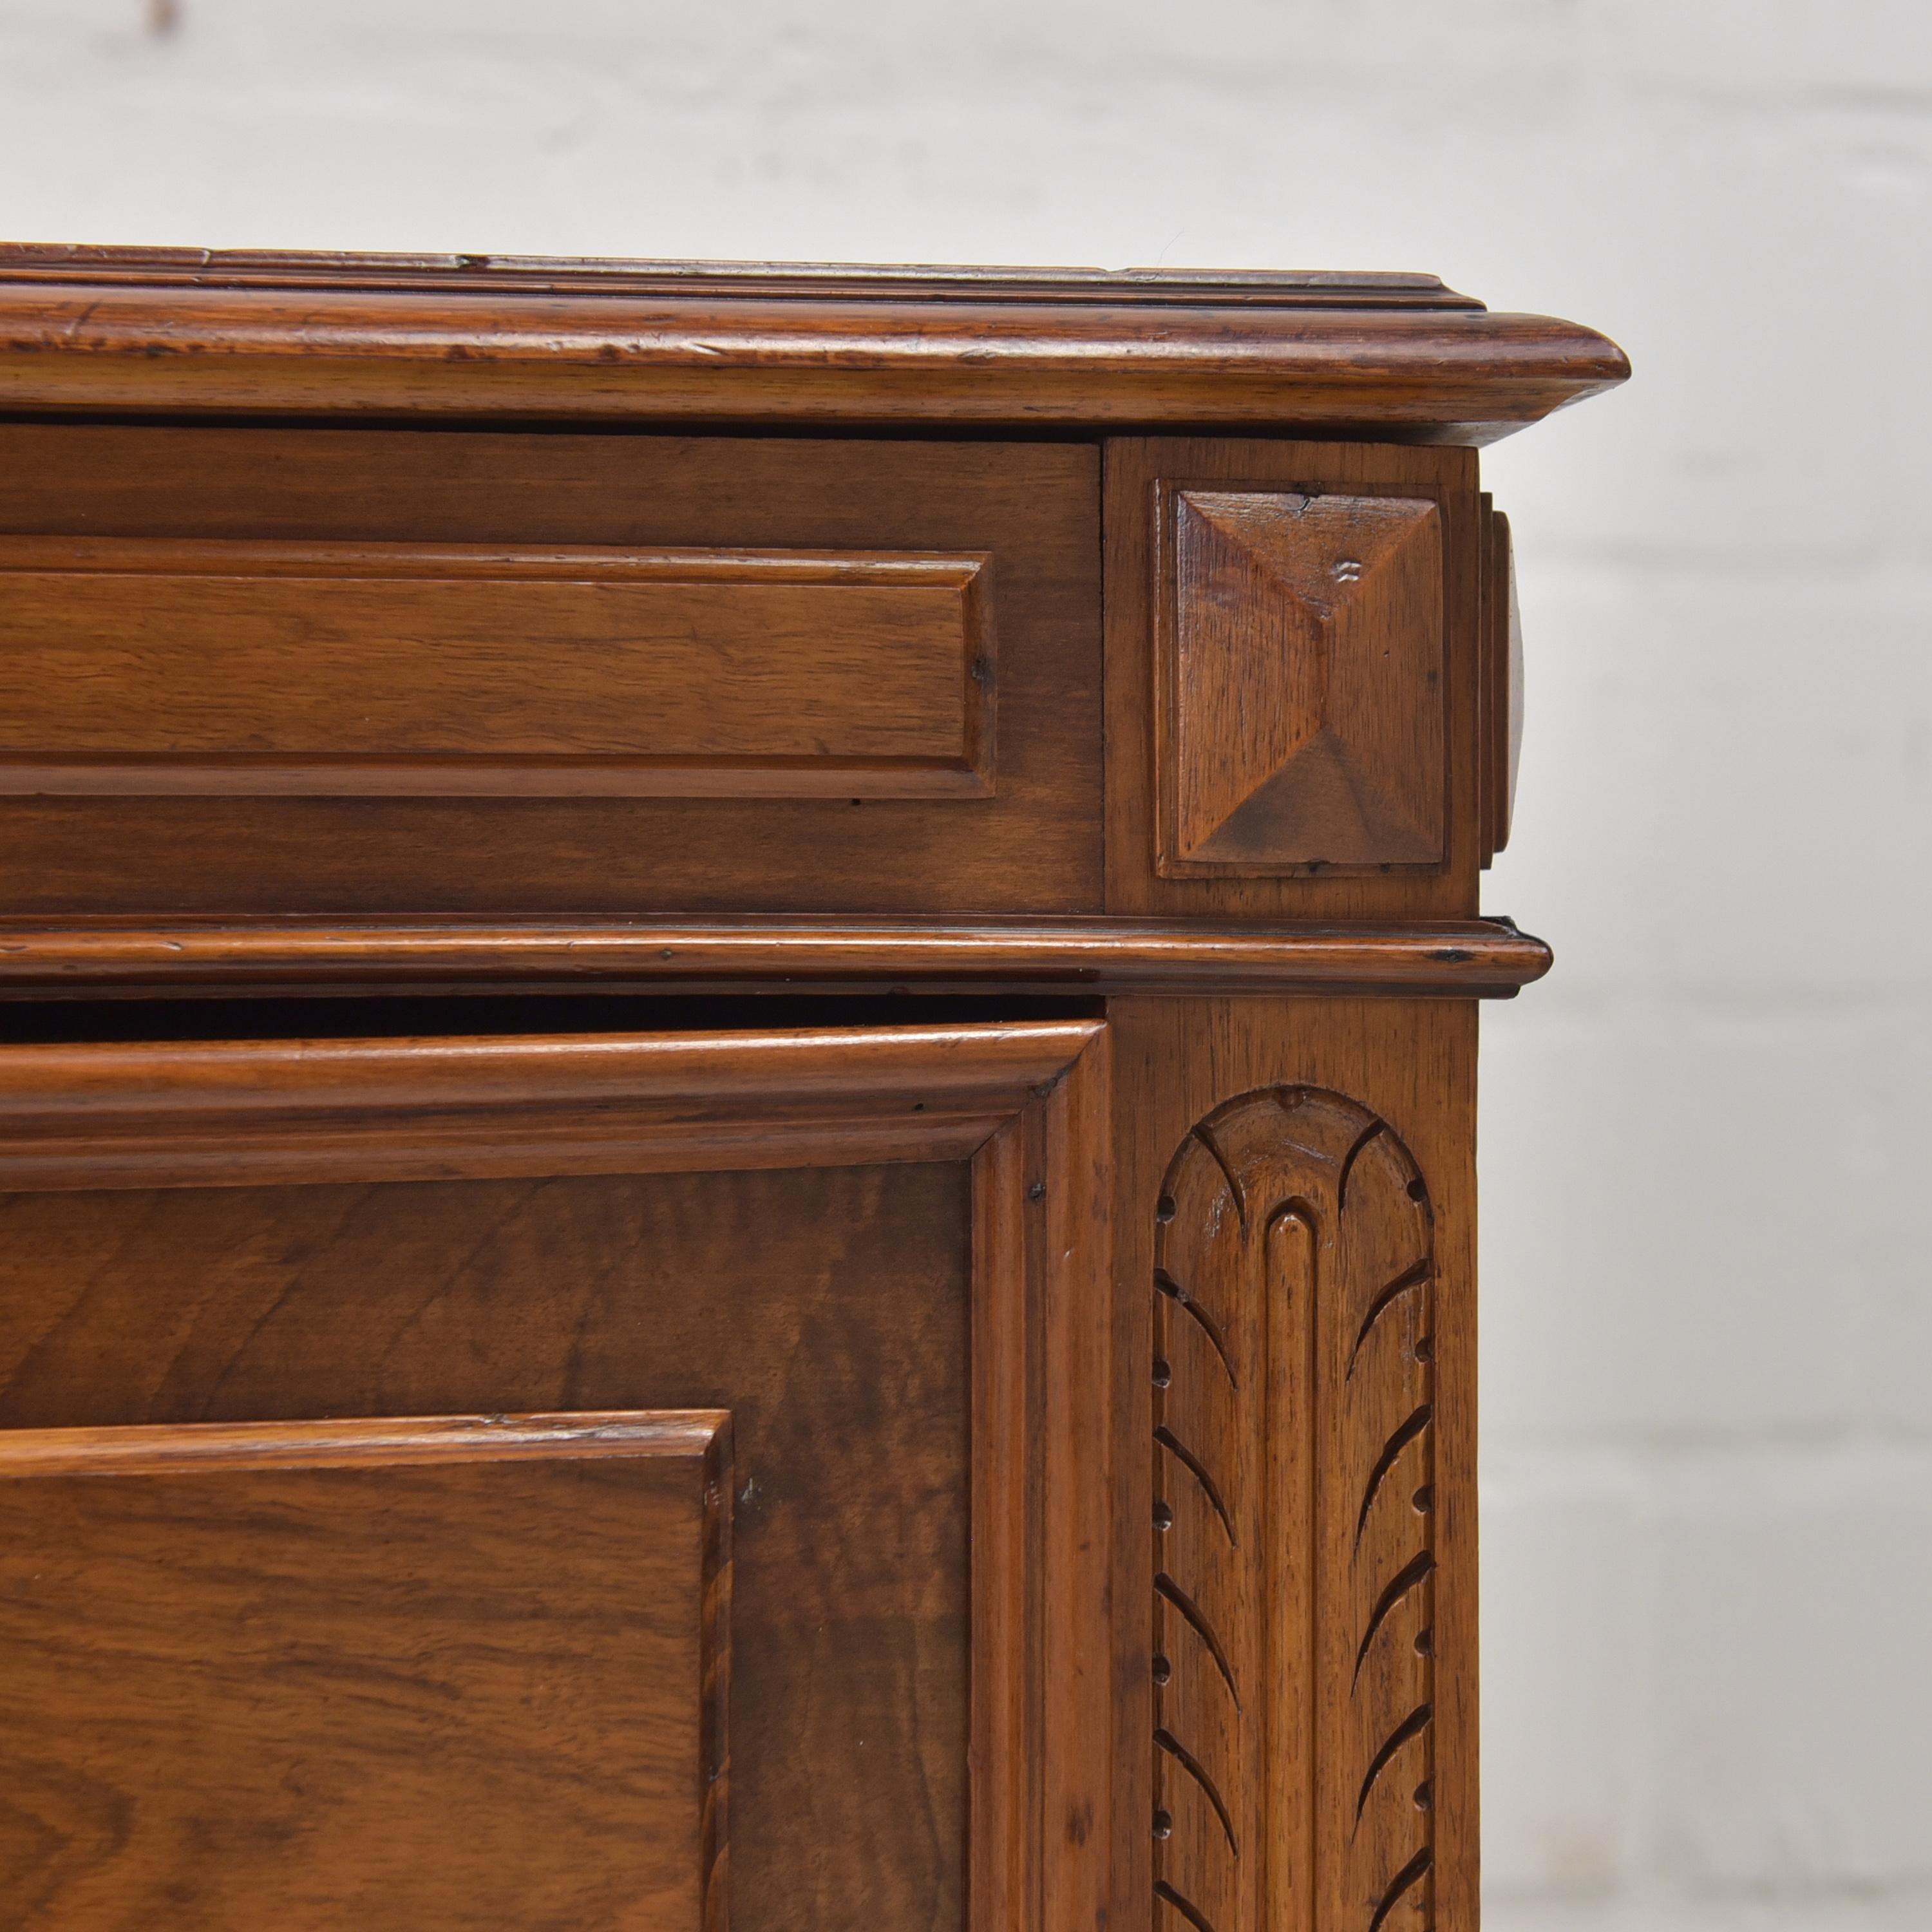 Gründerzeit Small Deep Chest of Drawers in Solid Walnut, 1900 For Sale 3